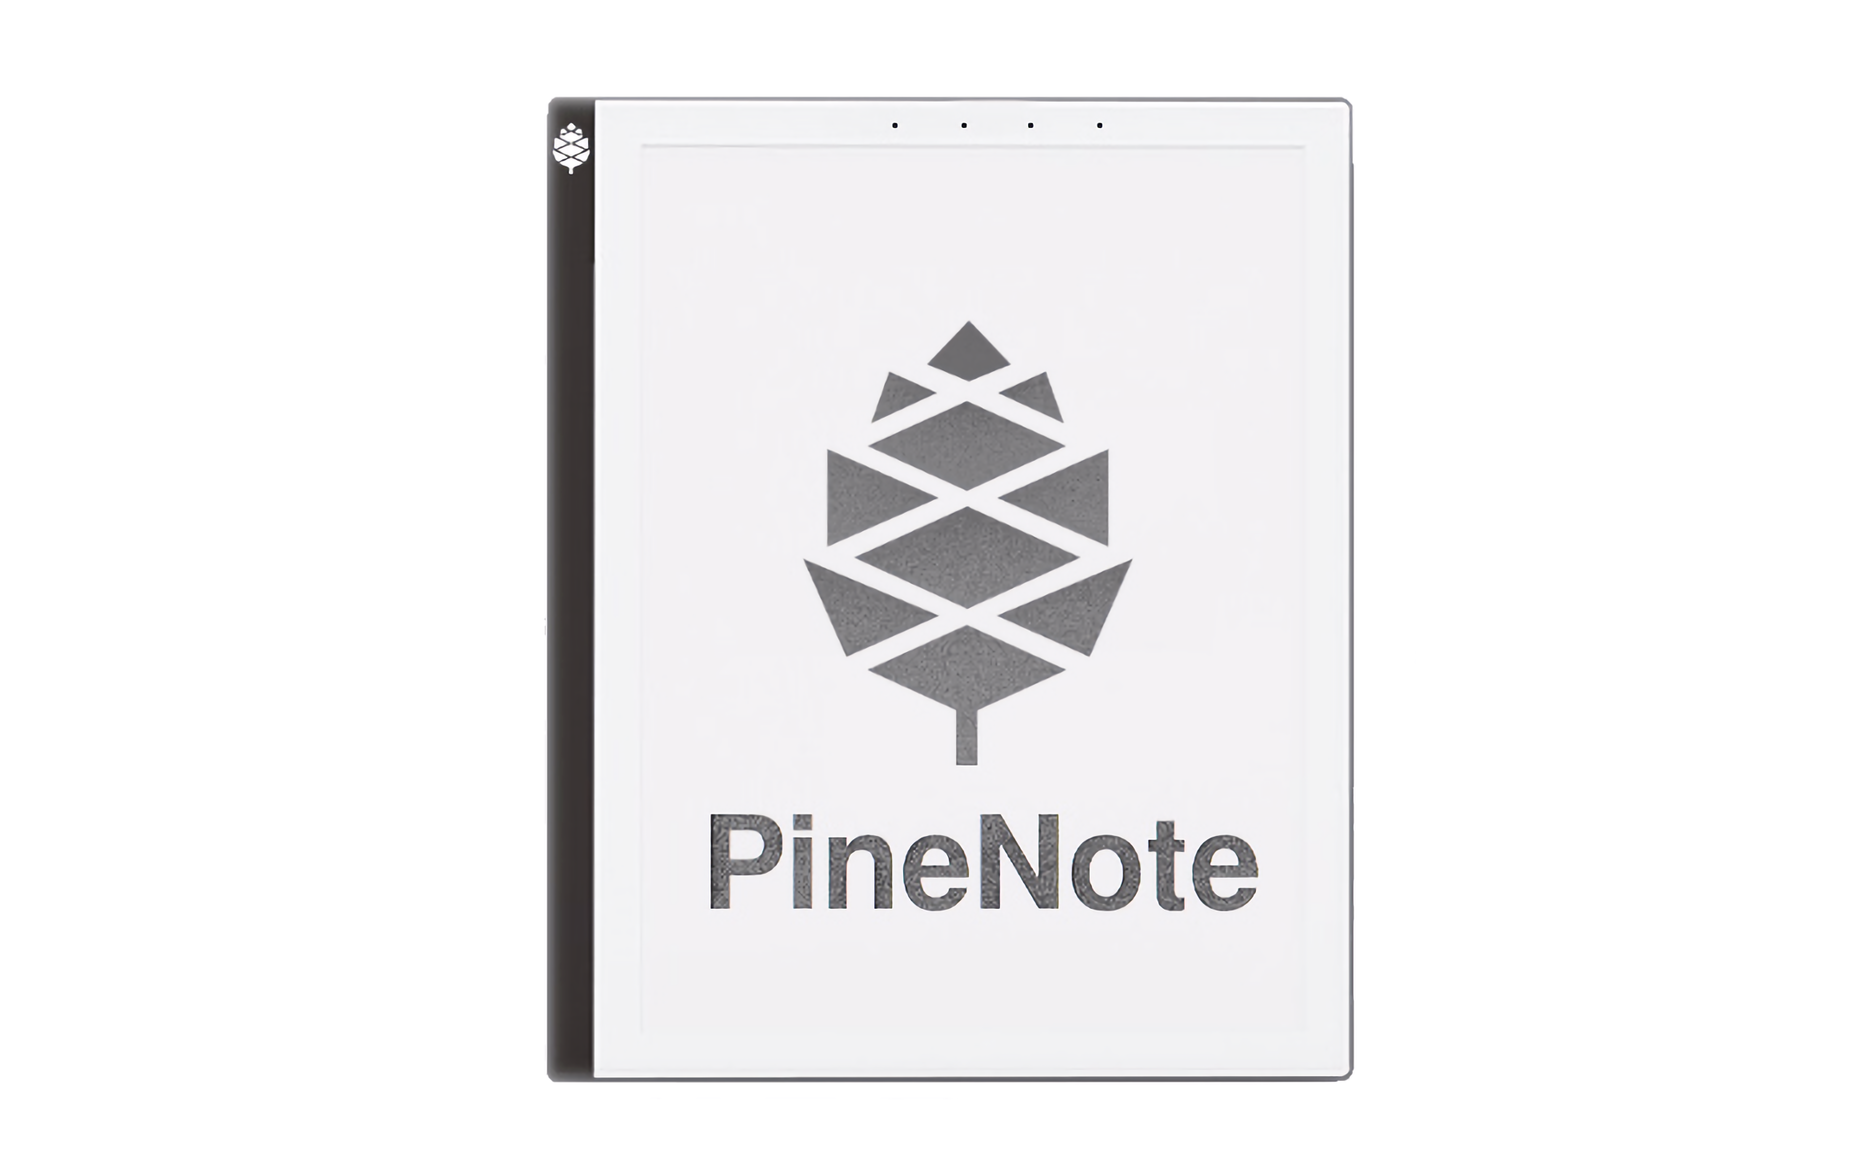 Pine64 introduces the PineNote, a $399 e-ink reader running Linux